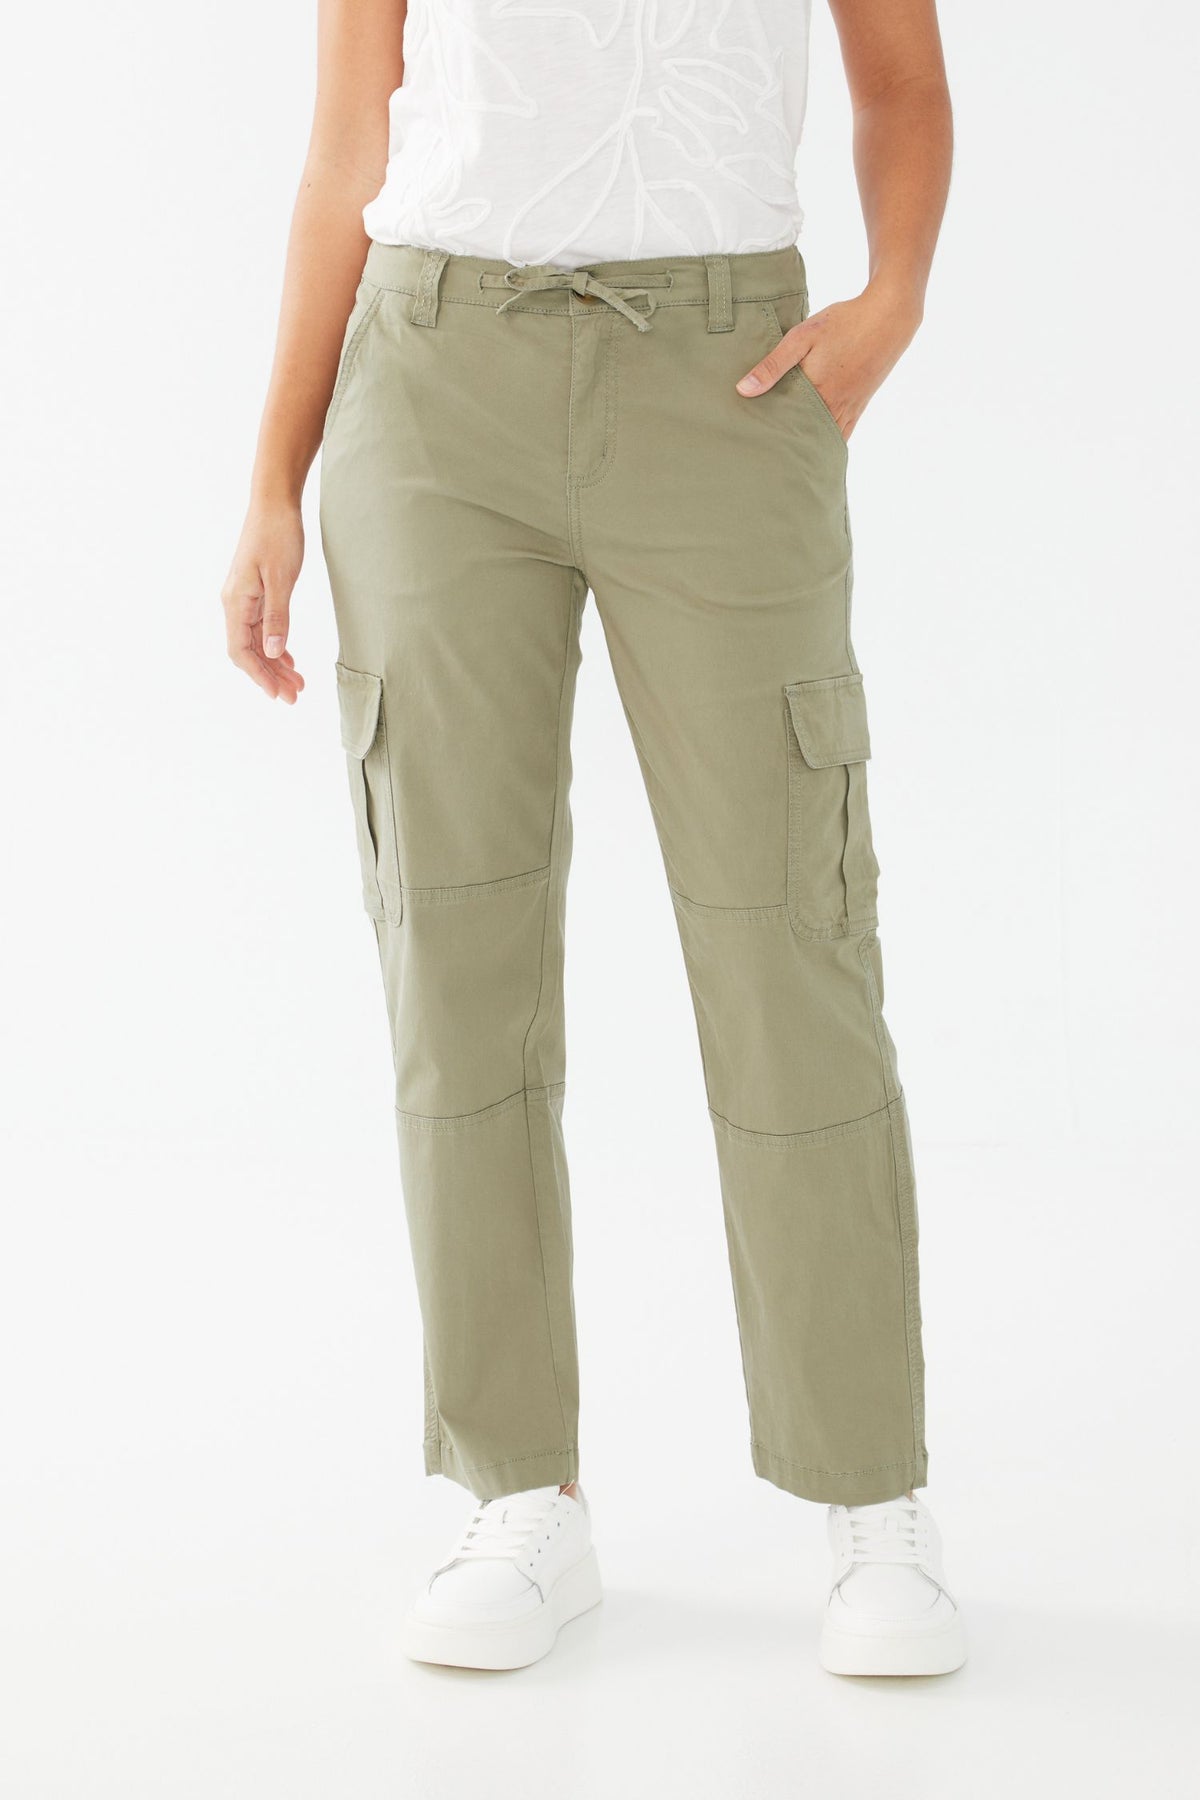 FDJ Pull On Cargo Wide Ankle Tencel Pants - Style 2732944, front